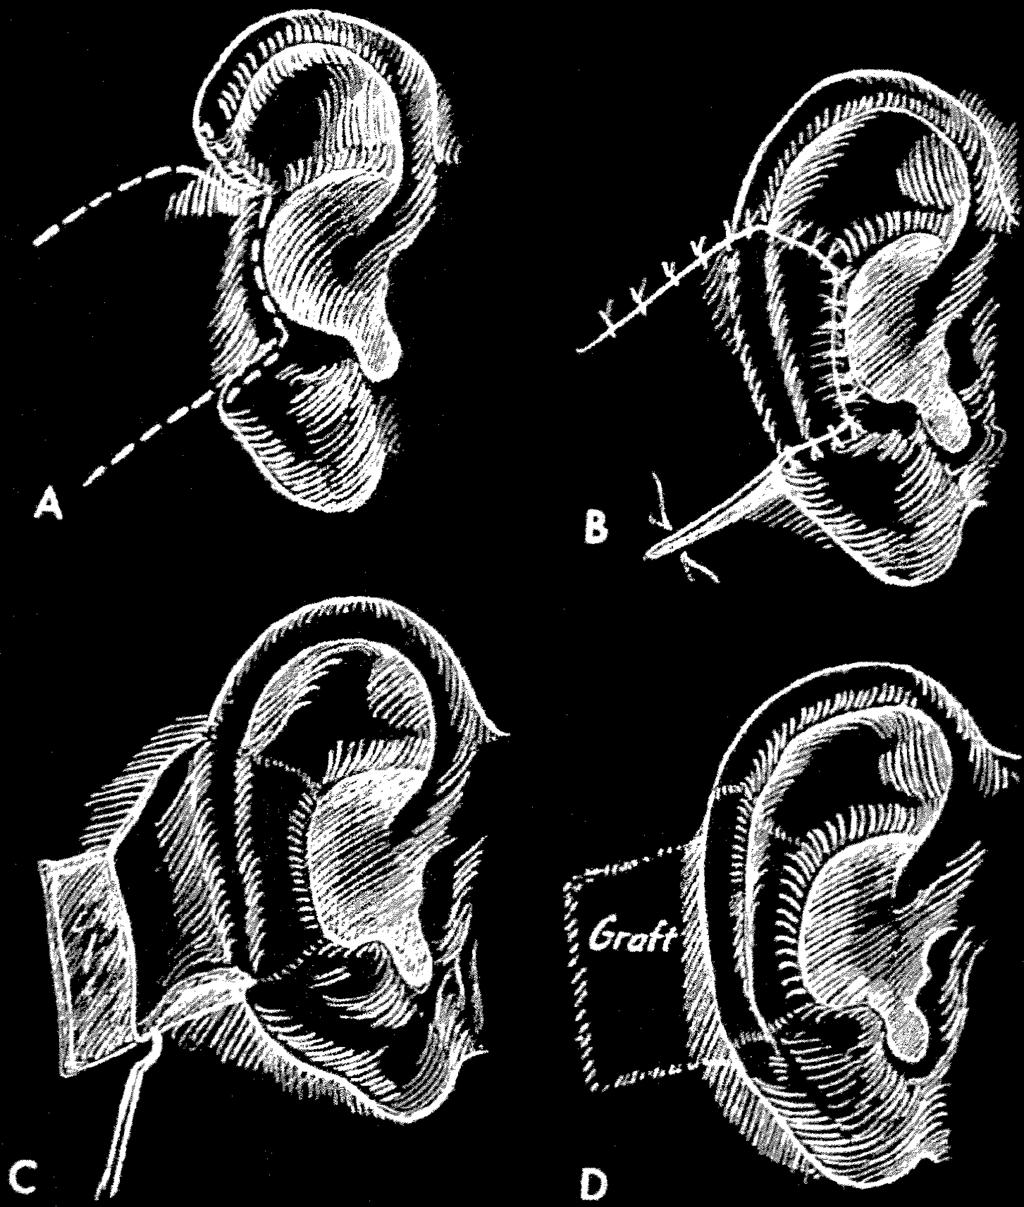 90 E.F. Aguilar III / Clin Plastic Surg 31 (2004) 87 91 Finally, the partial loss of an earlobe can be reconstructed by the use of the remaining skin or local flaps.